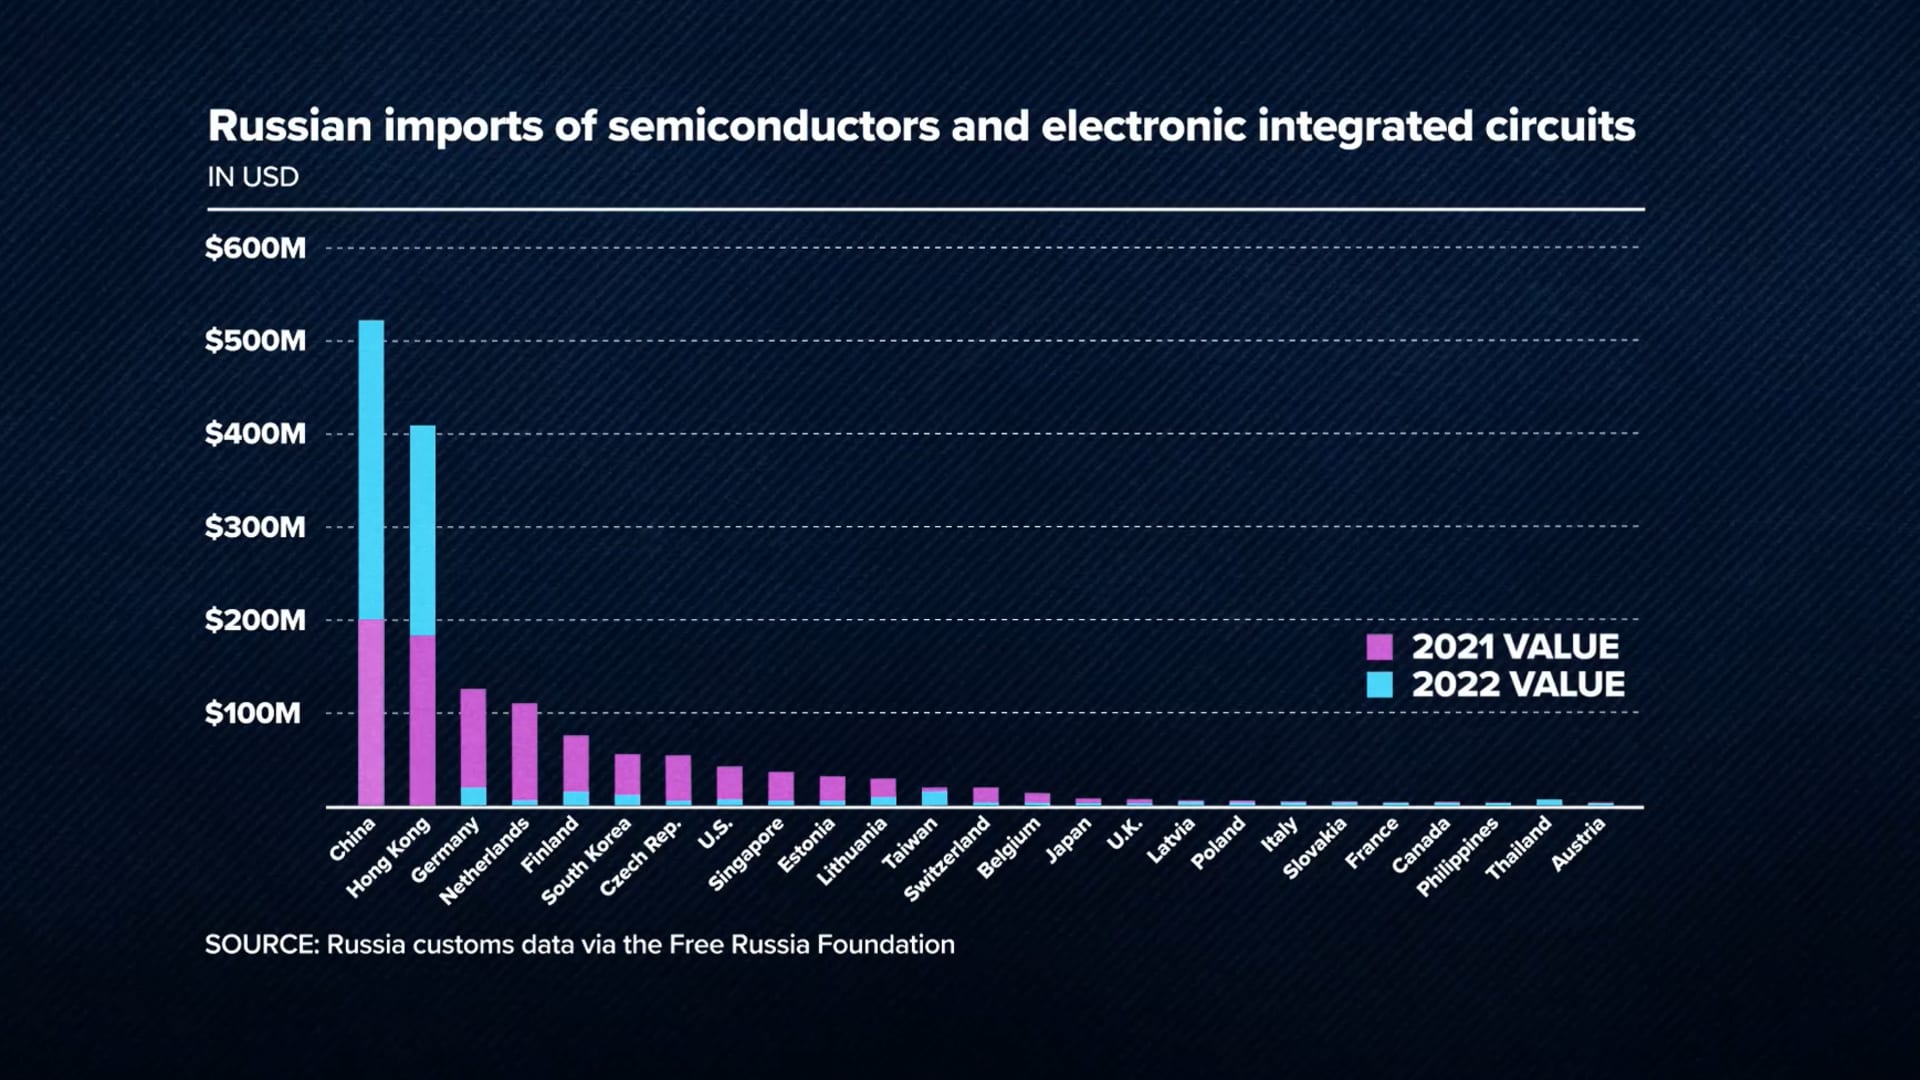 Semiconductor sales to Russia from China and Hong Kong more than doubled in 2022 as Western sanctions took hold.